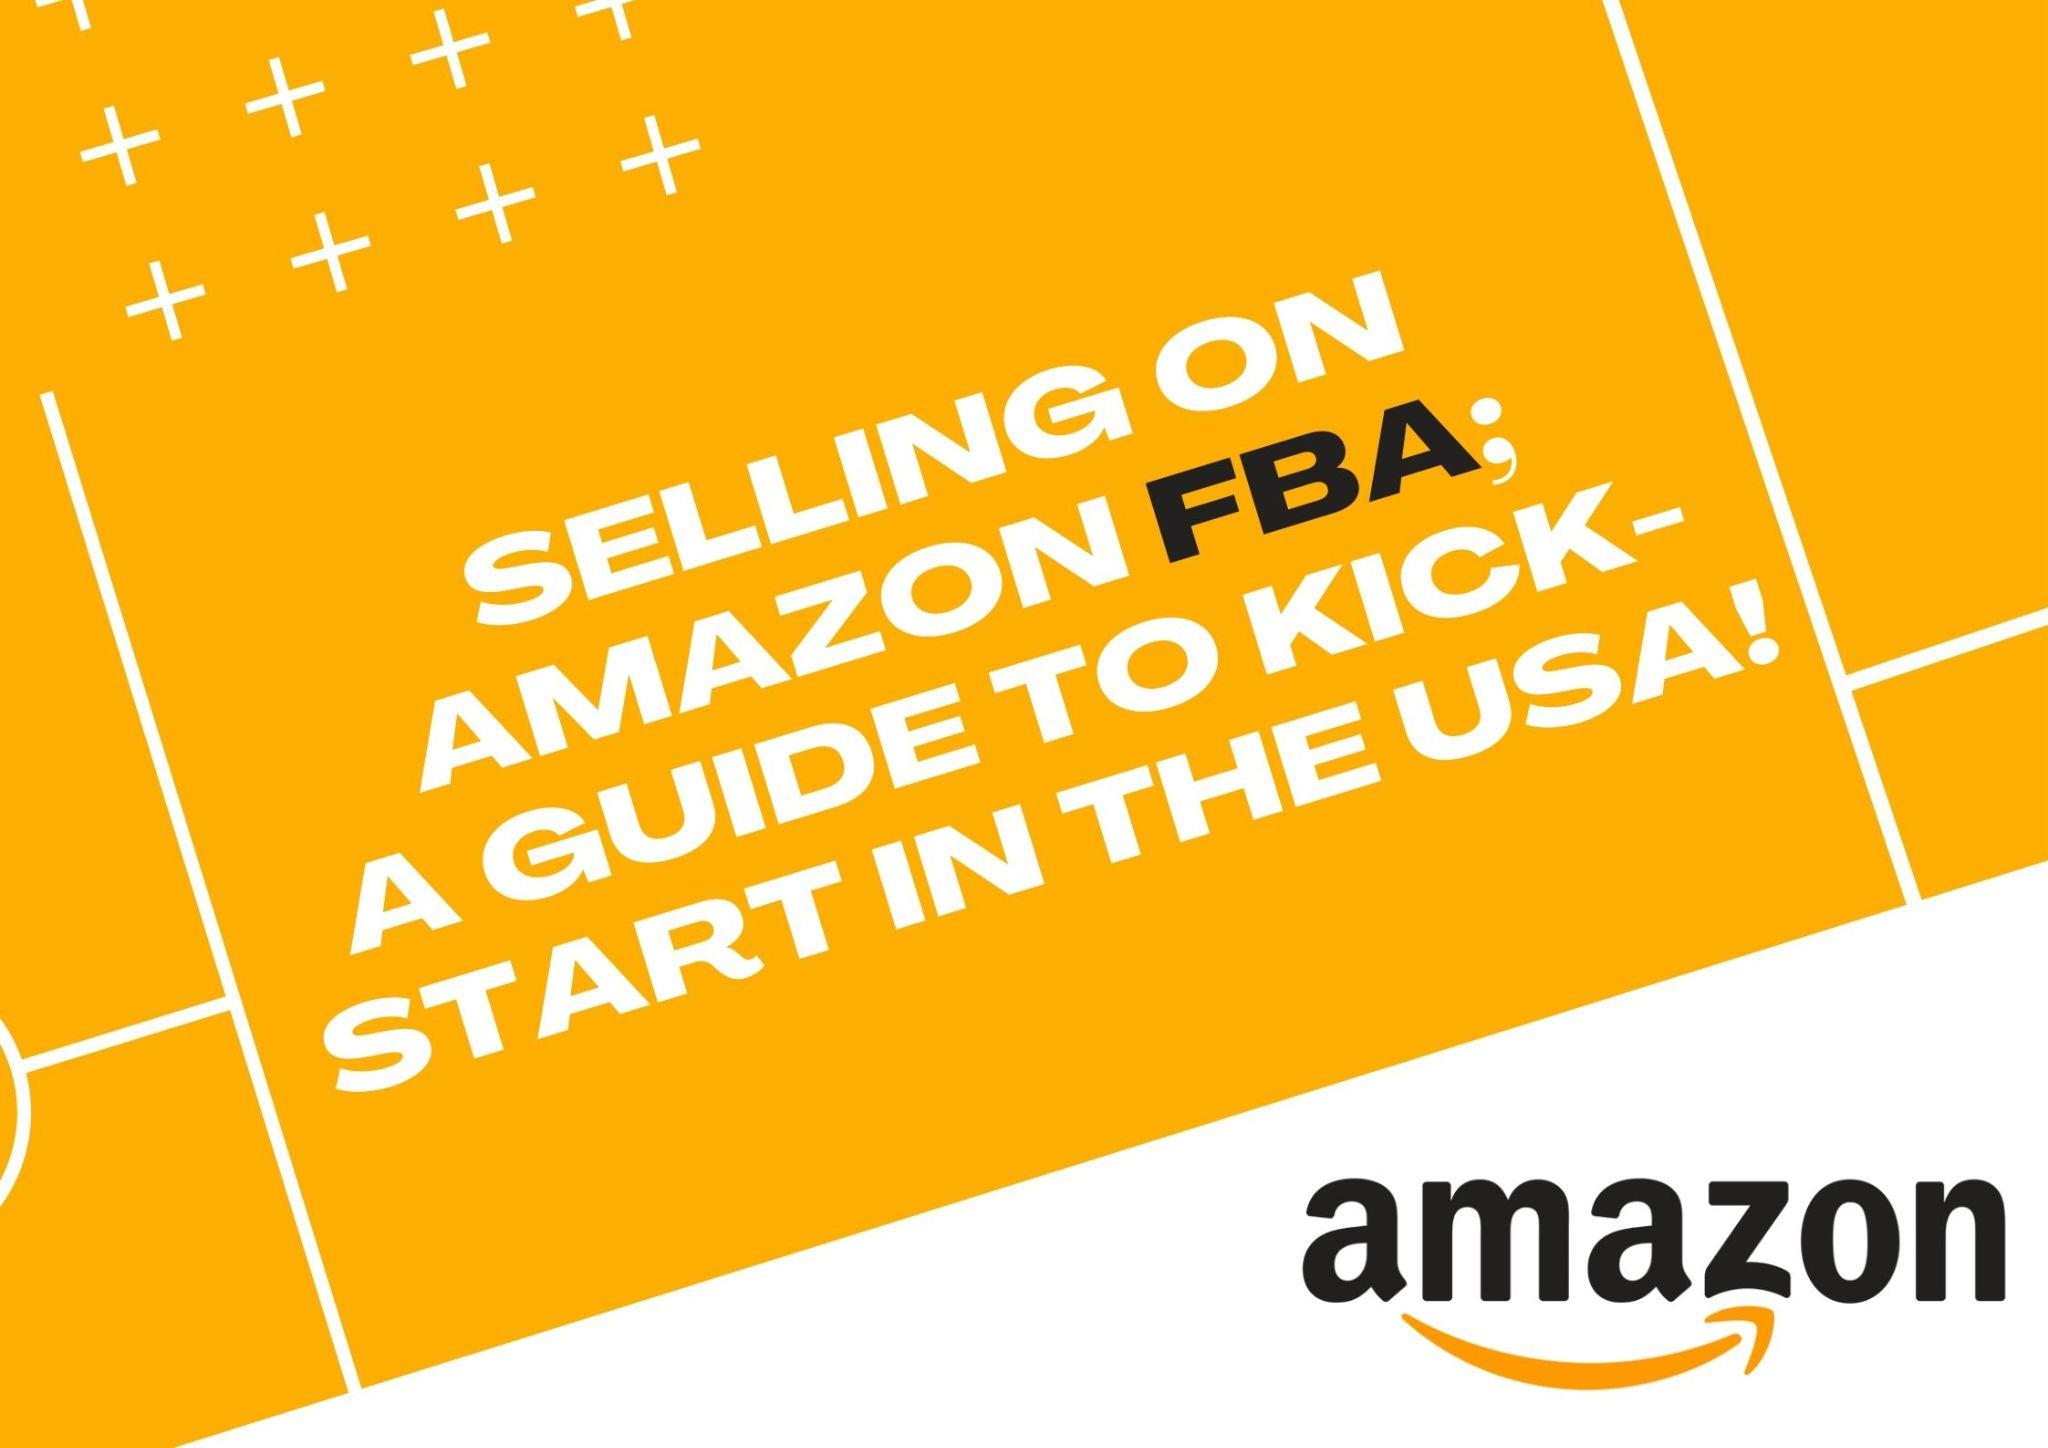 Selling on Amazon FBA: A Guide to Kick-start in the USA!